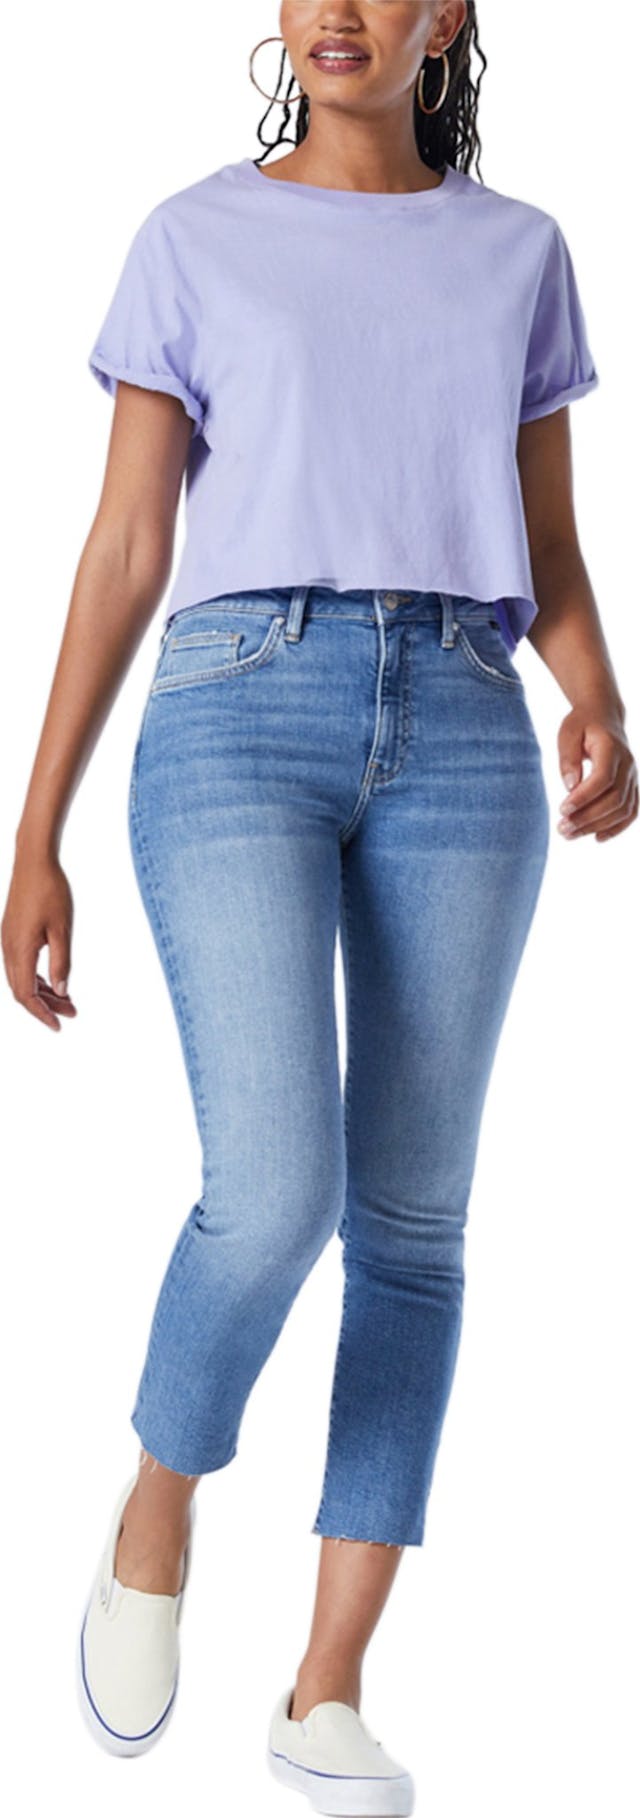 Product image for Viola Classic Jeans - Women's